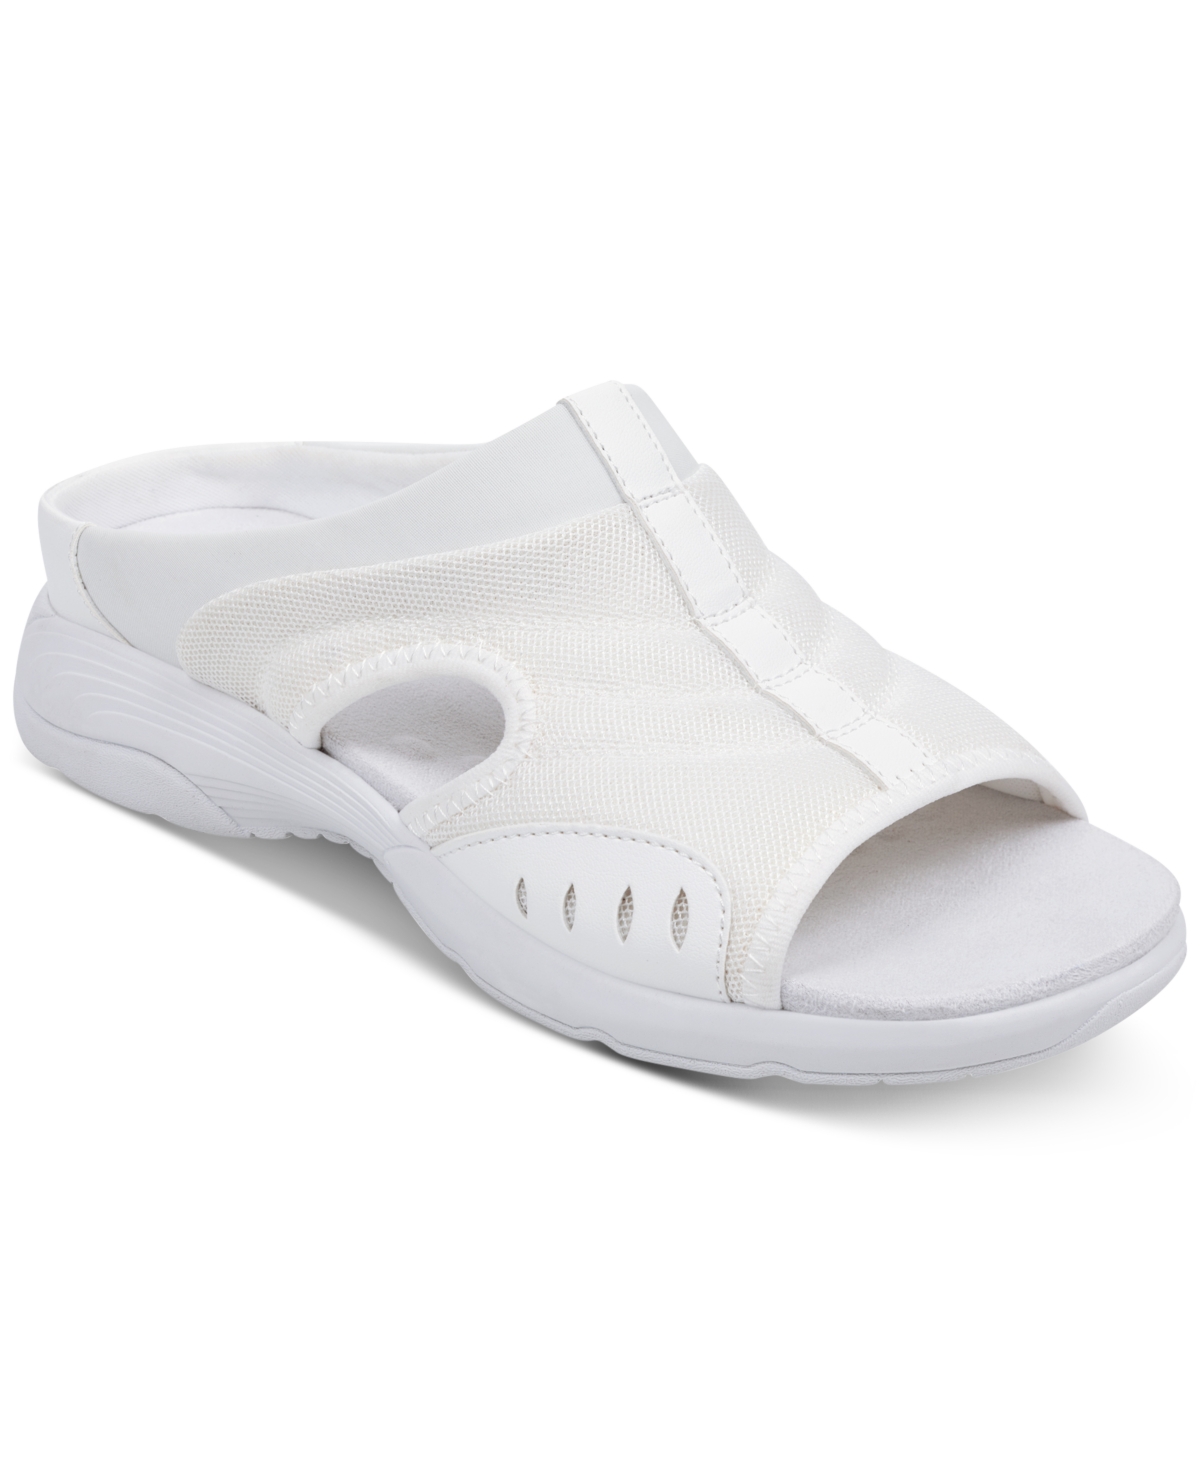 UPC 192733303906 product image for Easy Spirit Women's Traciee Square Toe Casual Flat Sandals Women's Shoes | upcitemdb.com